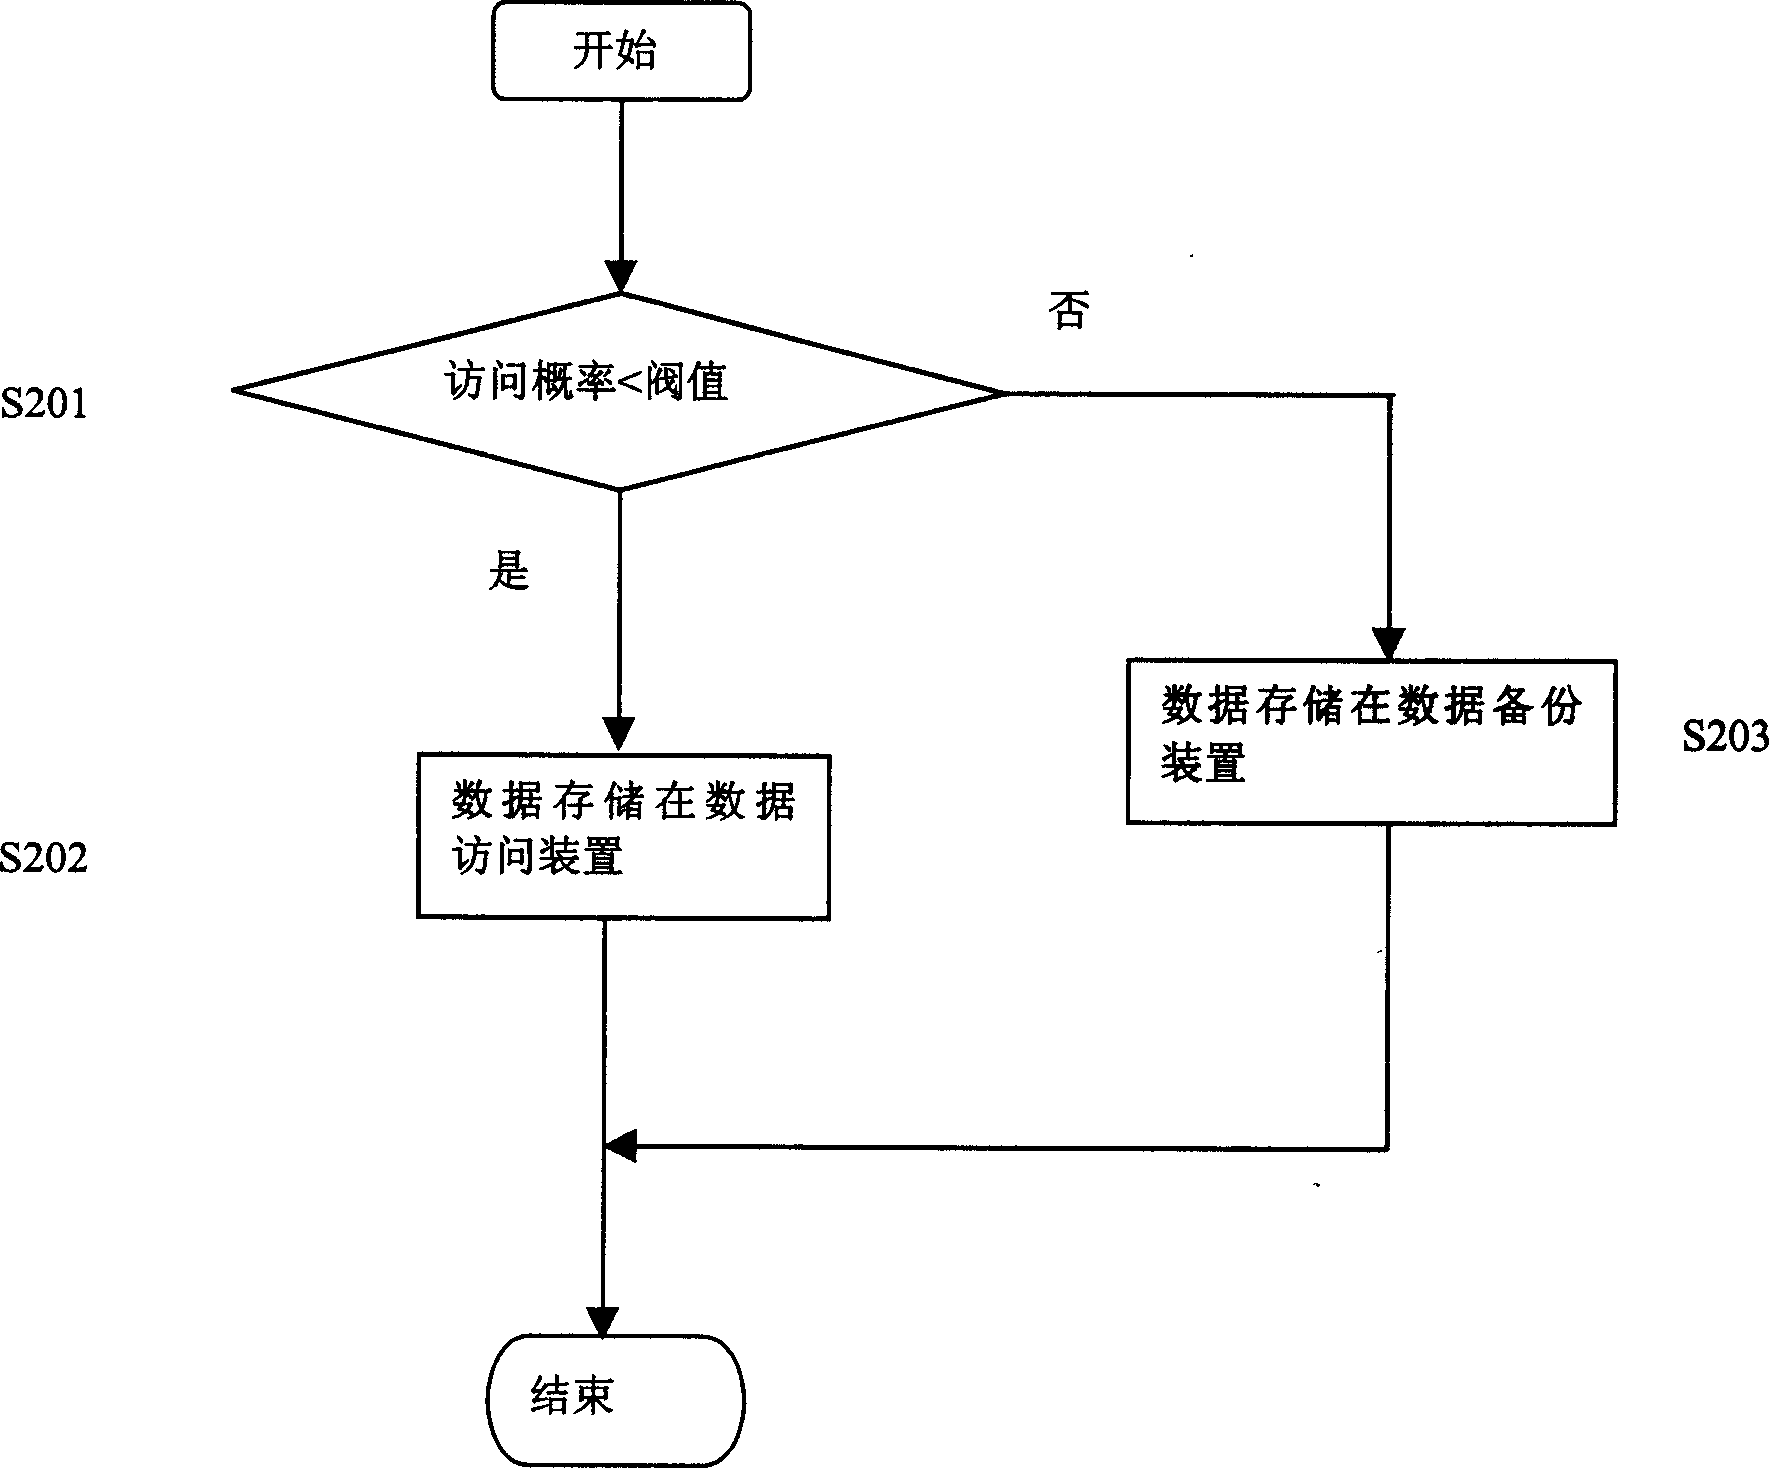 Method for dynamic transferring data and its storing system